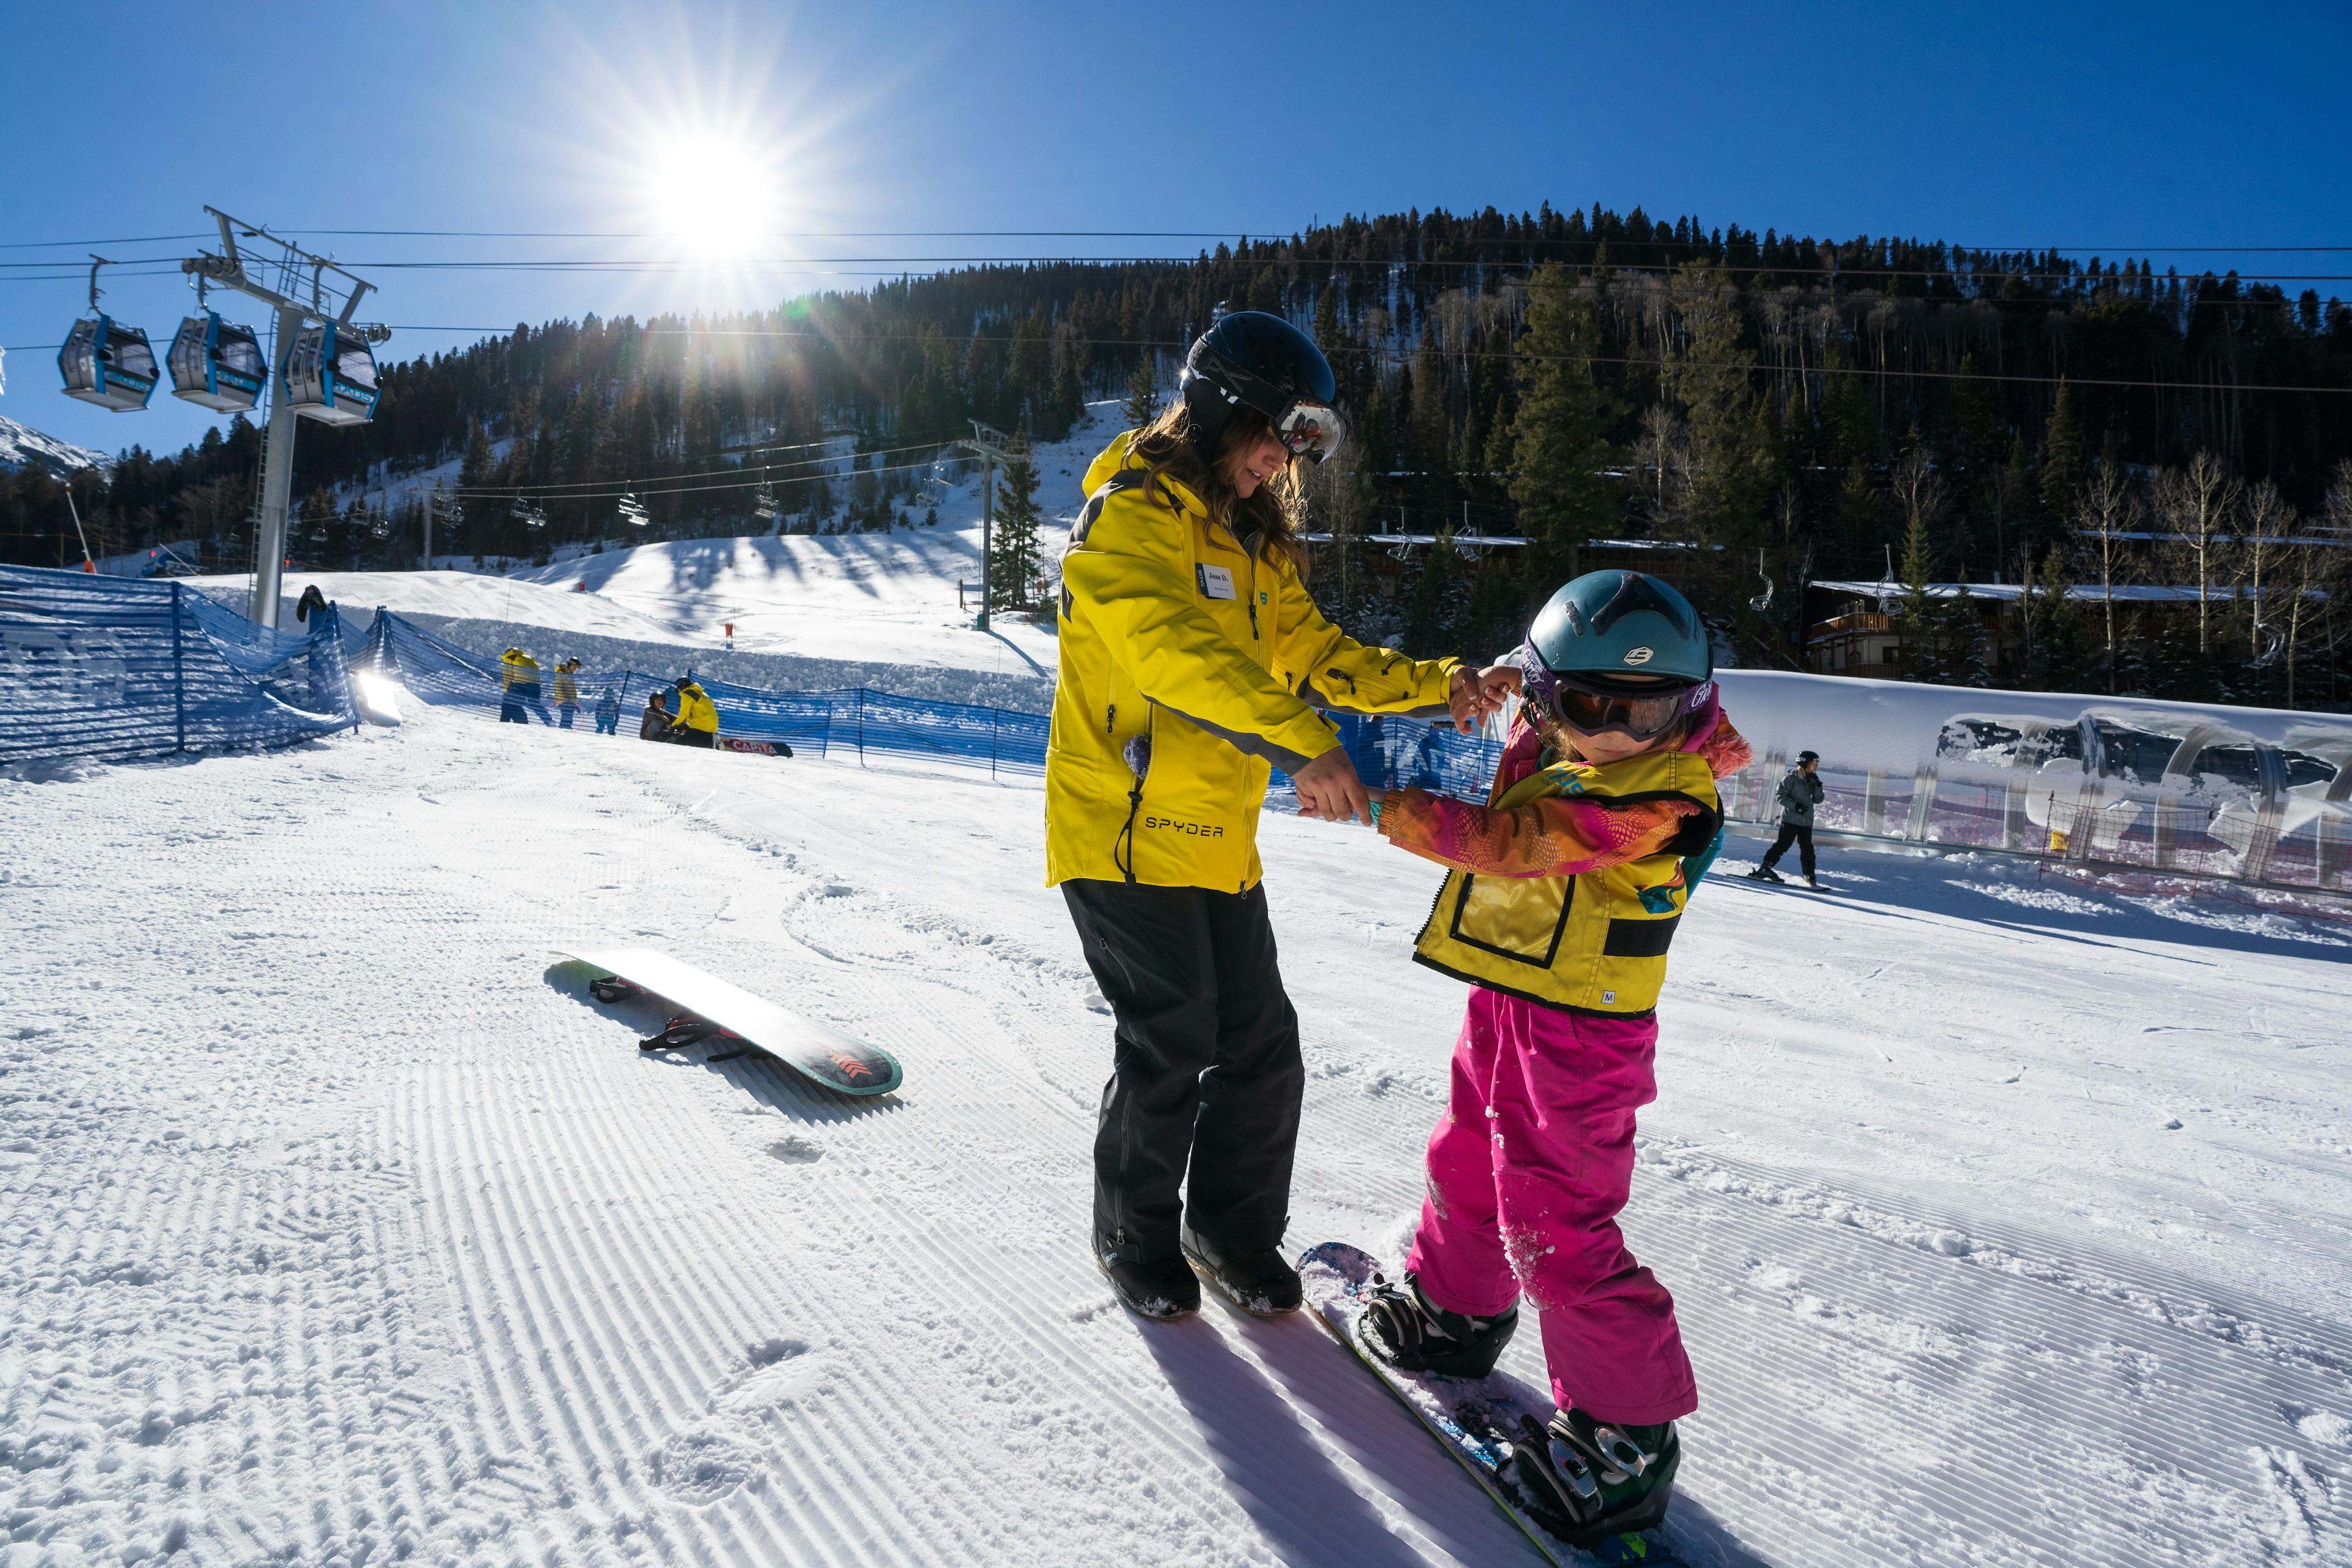 Instructor helping a child learn how to snowboard at Taos Ski Valley.